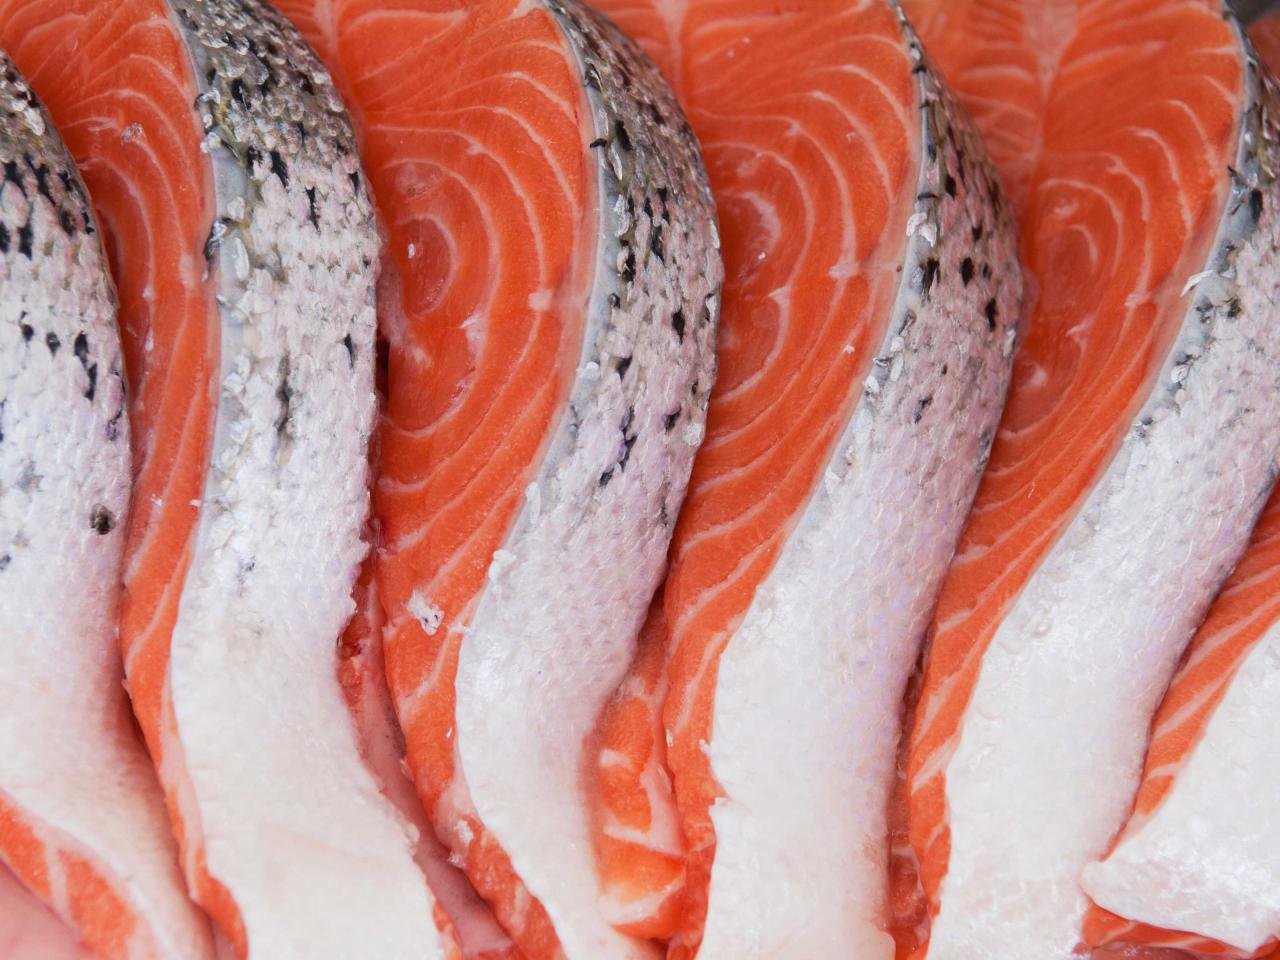 Can Raw Salmon Make You Sick: Addressing Food Safety Concerns